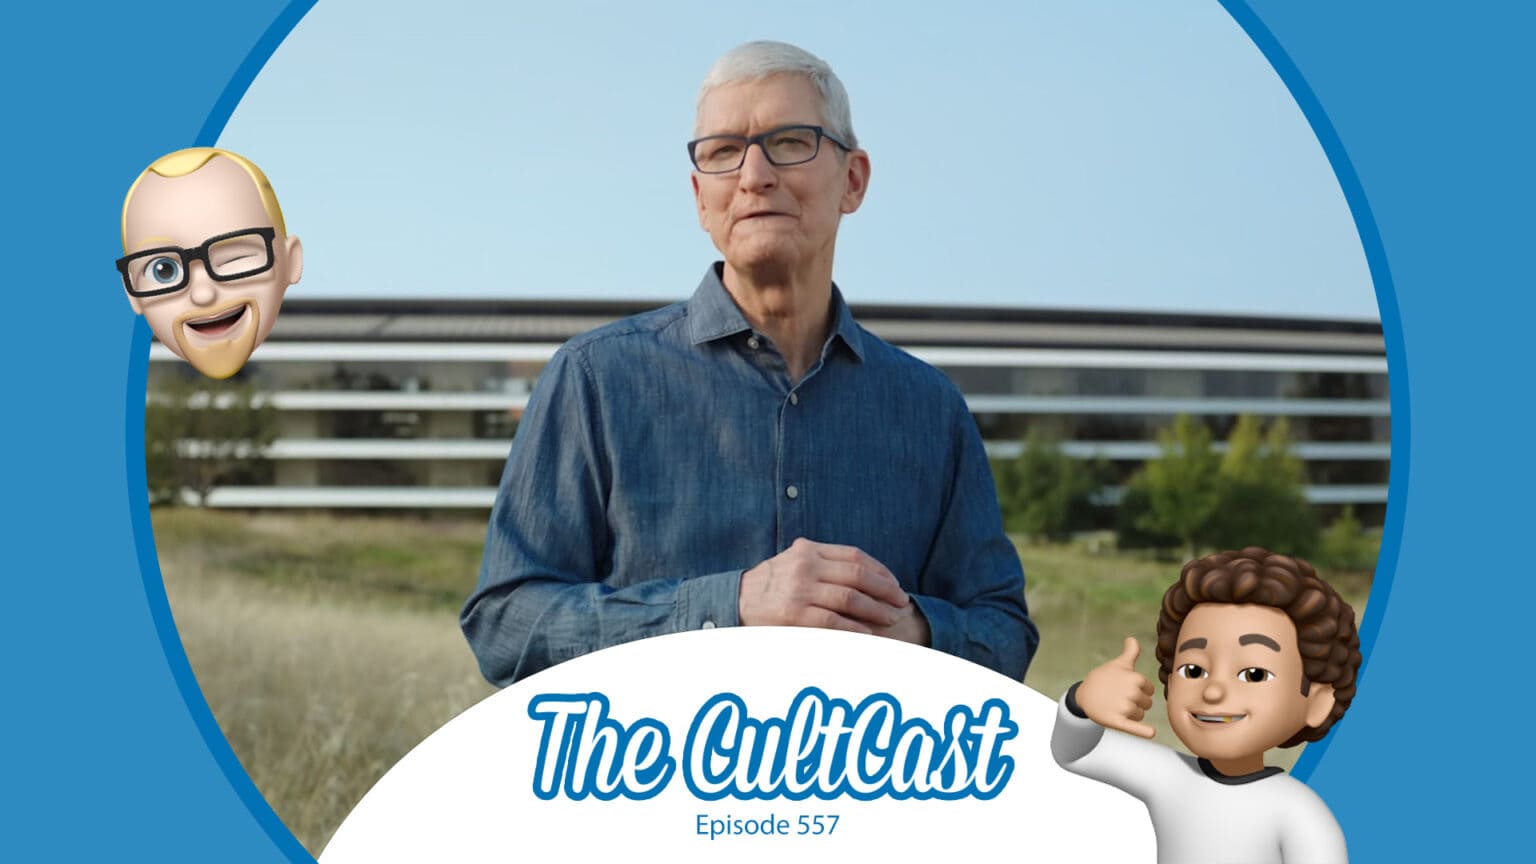 The CultCast: Tim Cook can't wait to tell you how excited he is about the new Apple gear at the Apple event on September 7!